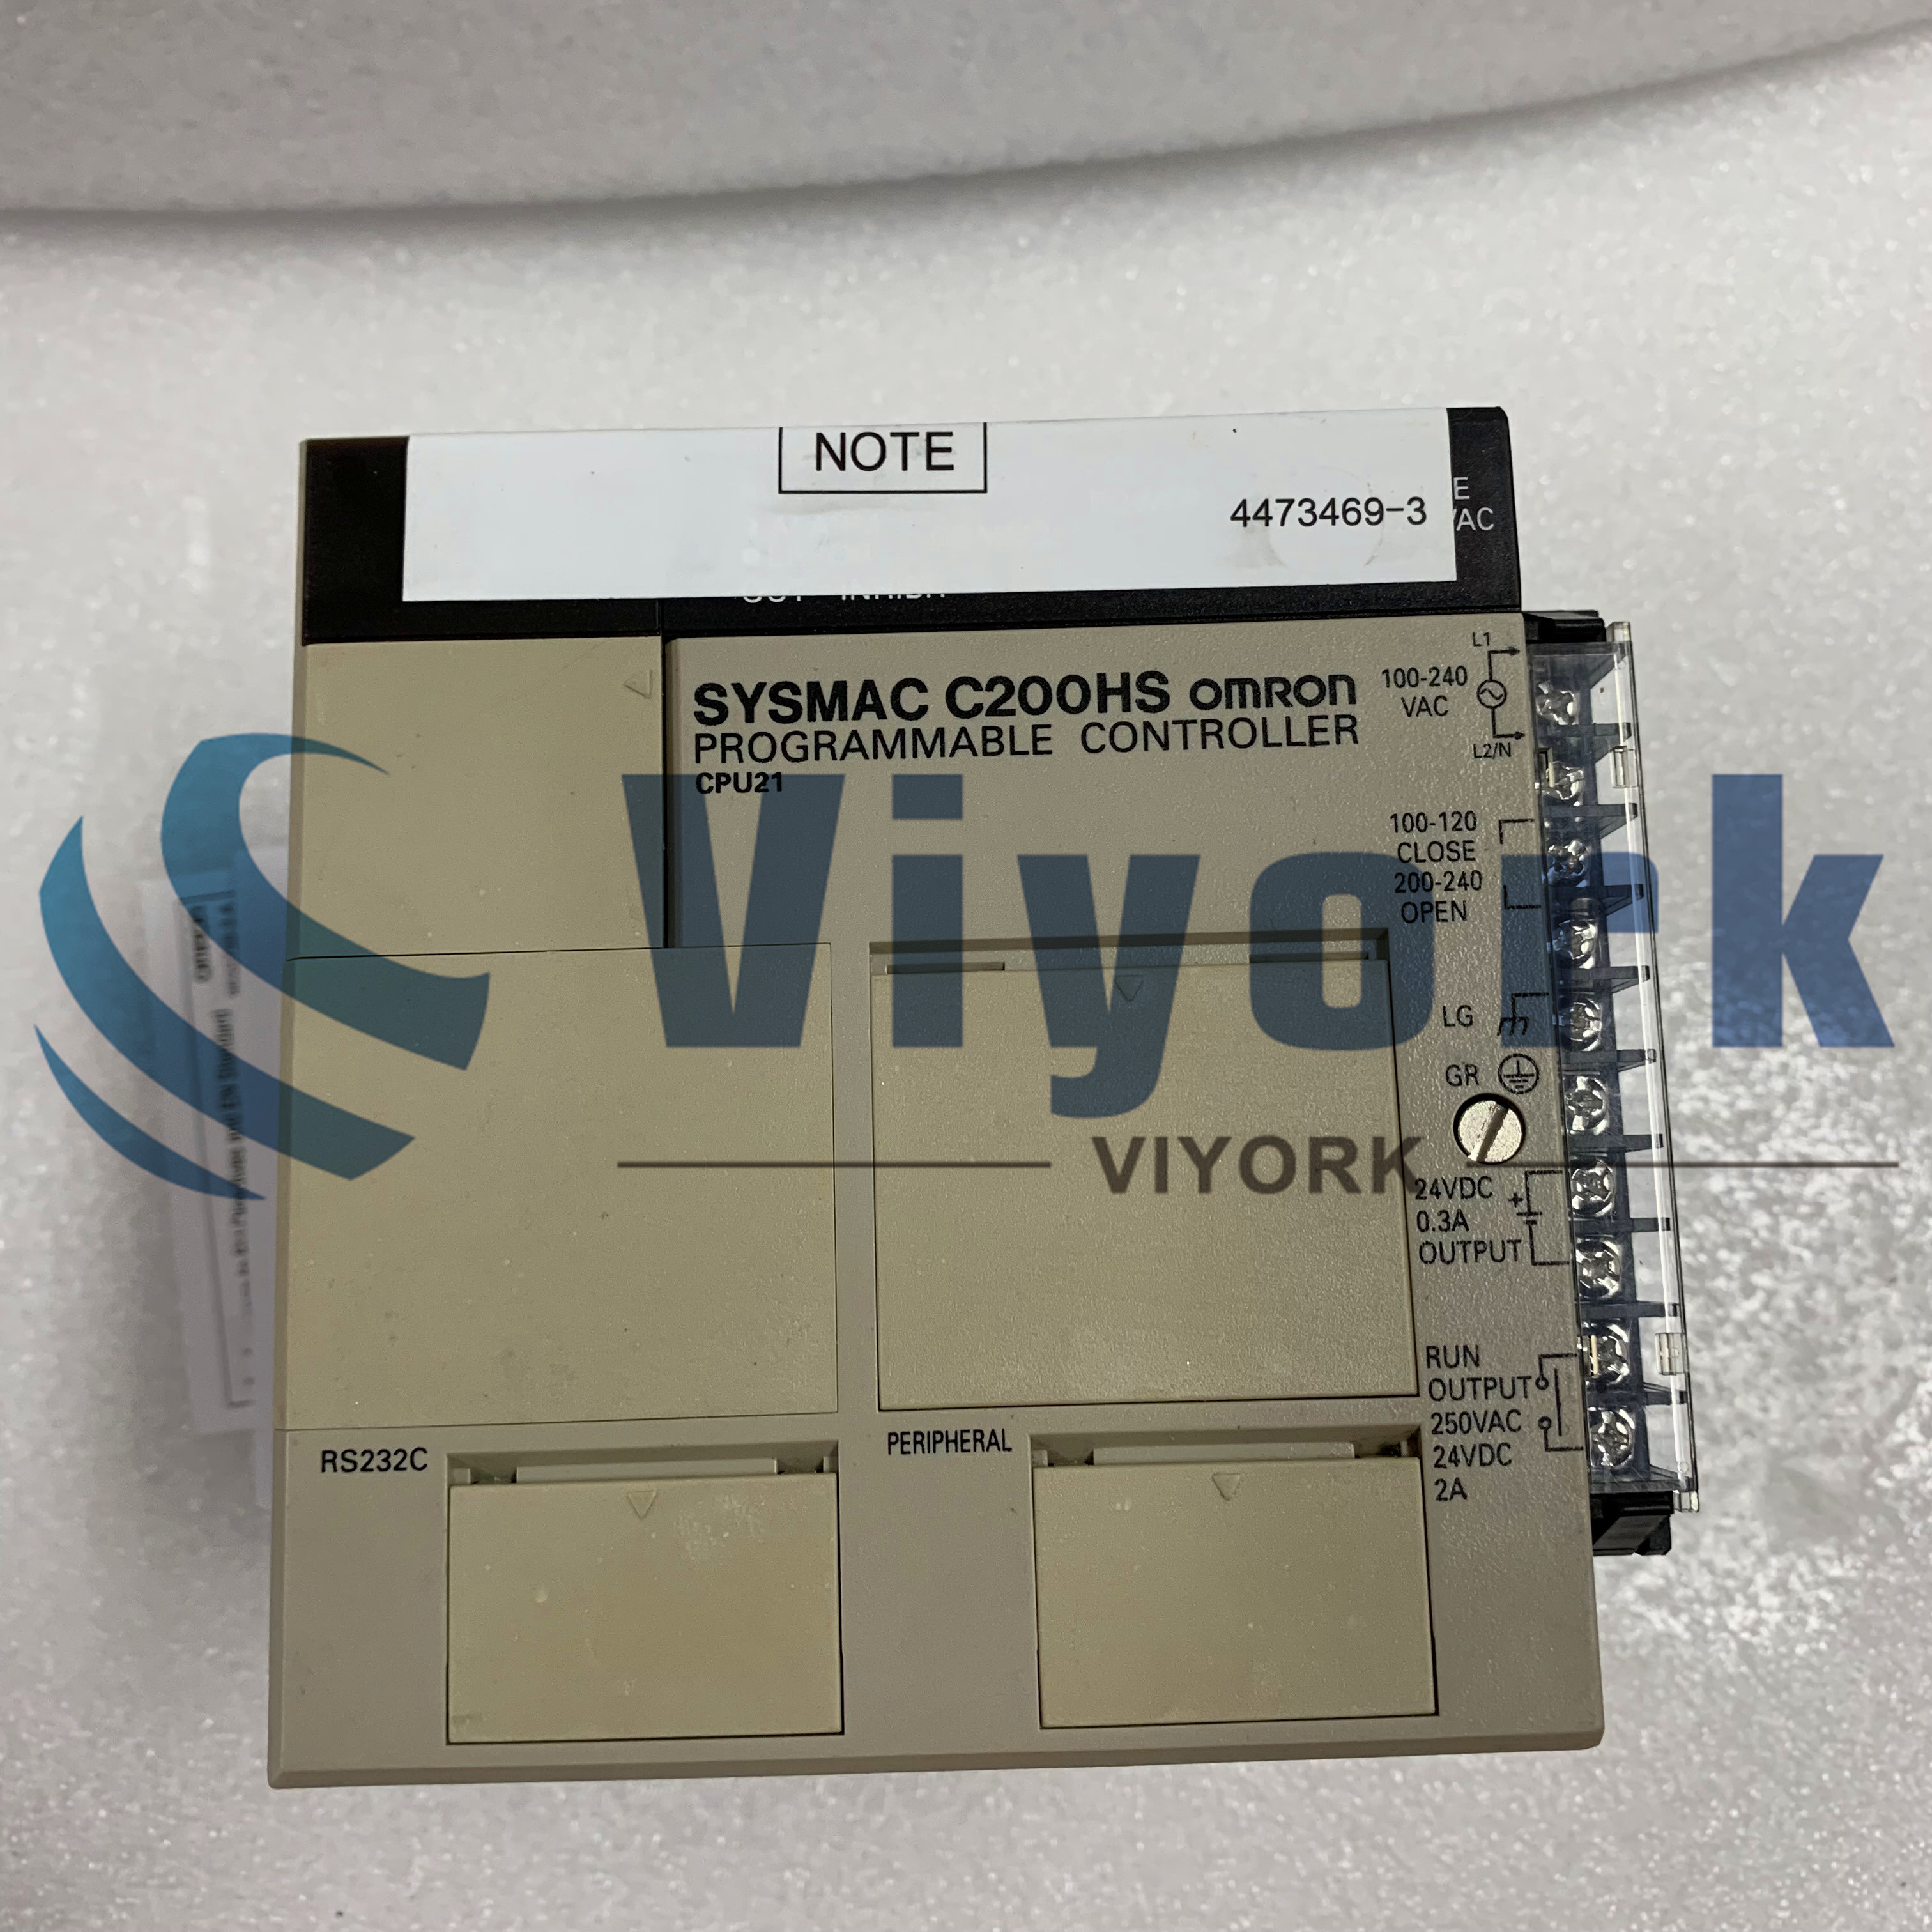 Omron C200HS-CPU21-E SYSMATIC CPU MODULE W/RS232 AND AC POWER SUPPLY 50/60HZ NEW